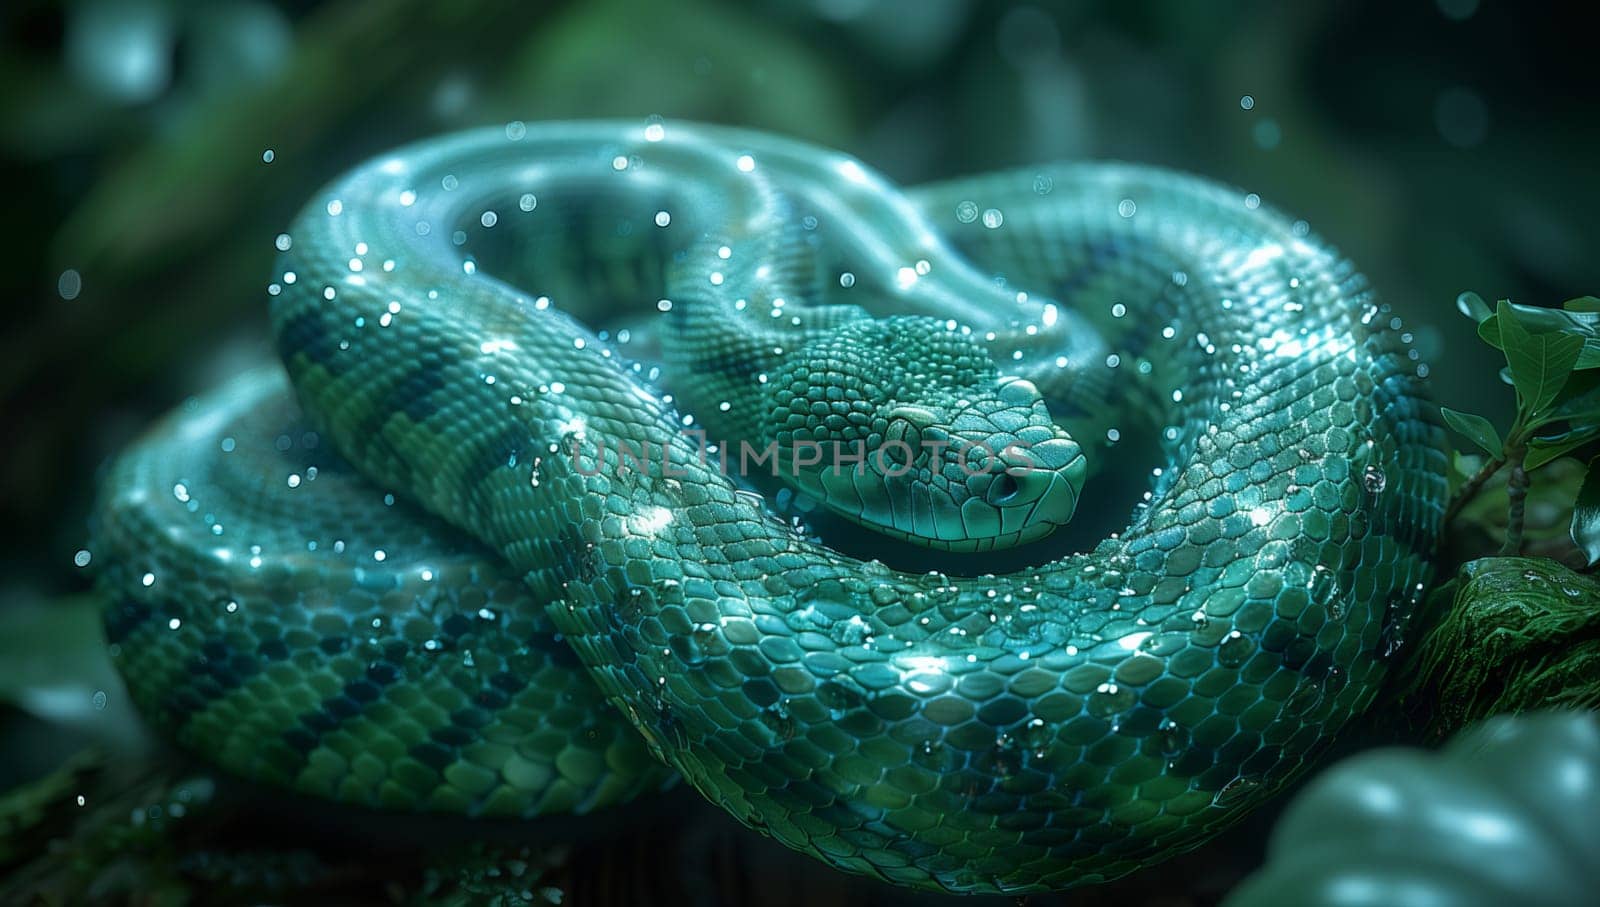 The electric blue scaled reptile, a green snake, is gracefully curled up on a tree branch, showcasing its fluid movements as a terrestrial animal